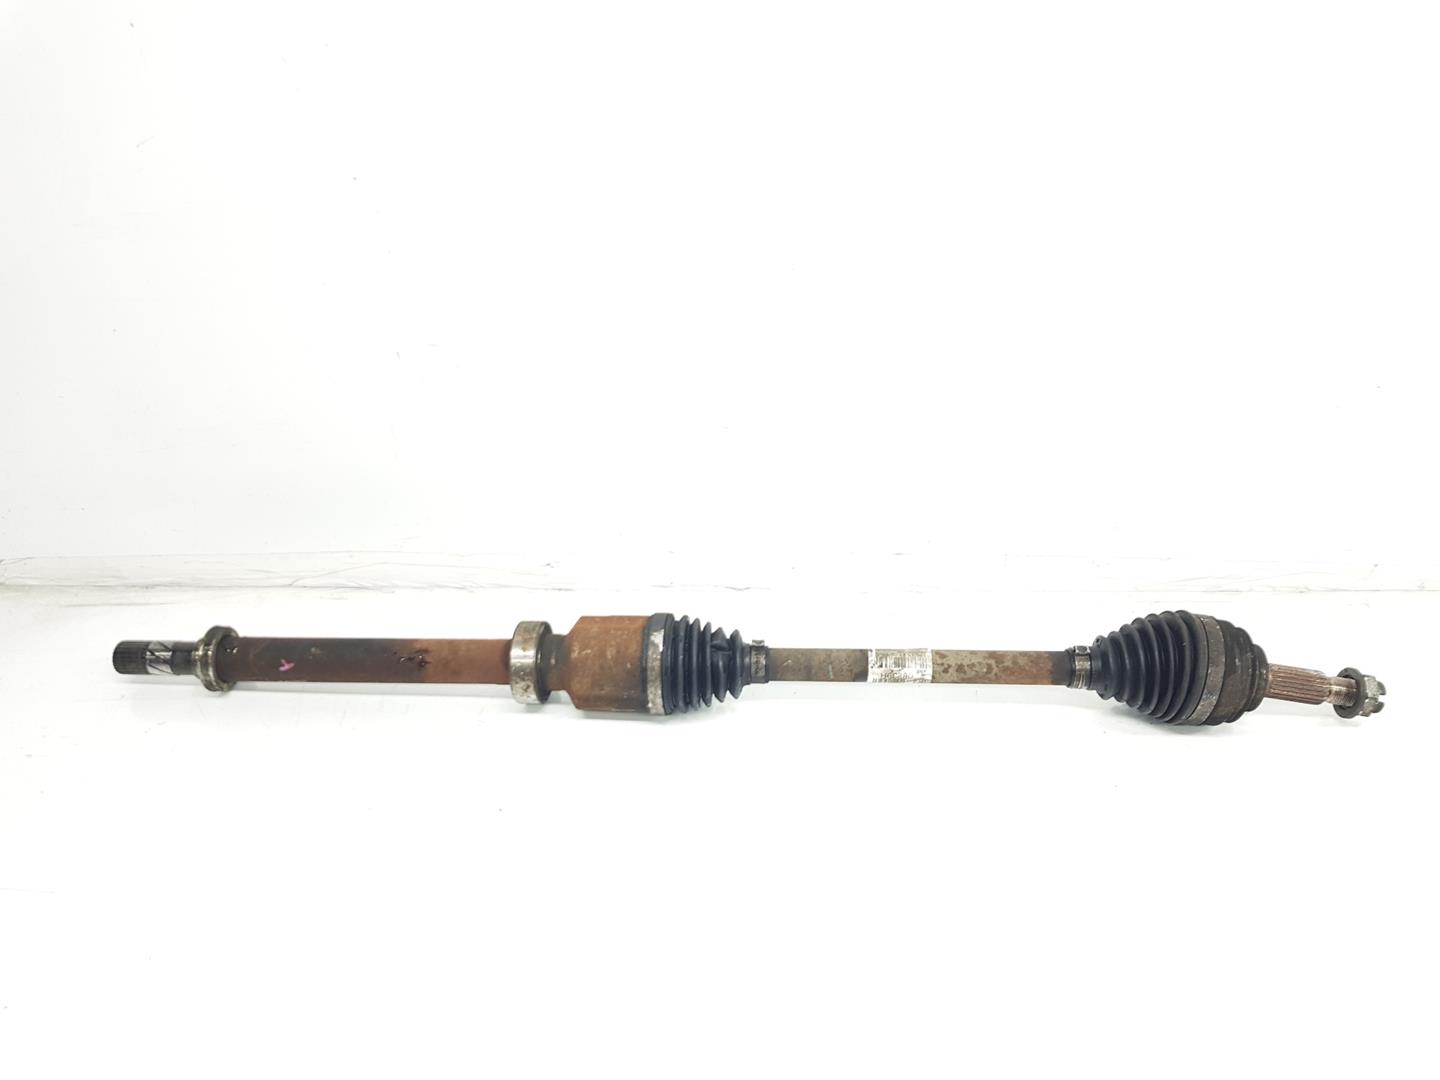 RENAULT Clio 3 generation (2005-2012) Front Right Driveshaft 391008239R, 391008239R 19797146